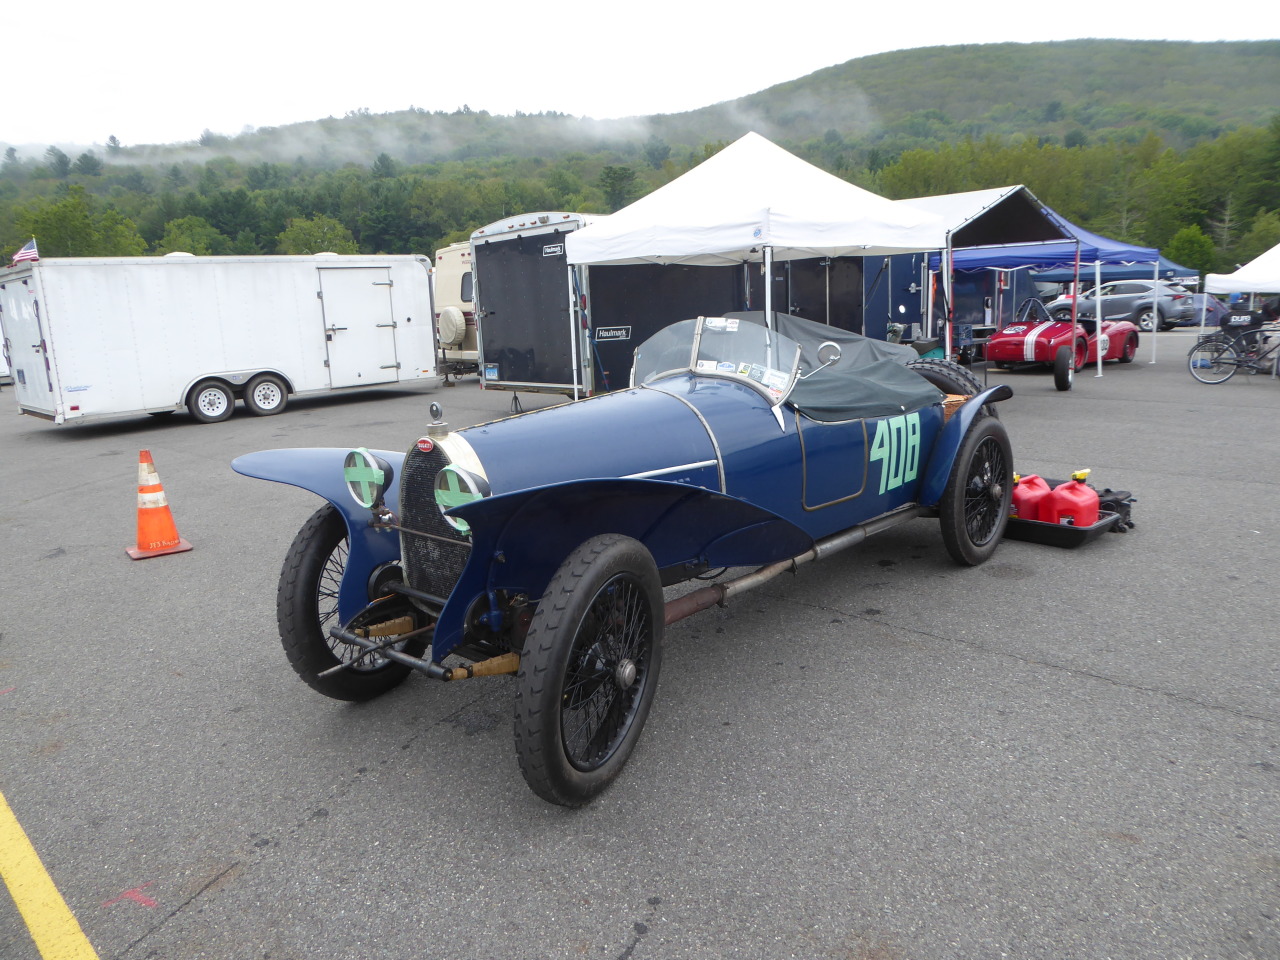 Bugatti Type 30, first of a line of 8-cylinder competition cars. #classic#race#rare#car#cars#auto#car show#bugatti#type 30#lime rock